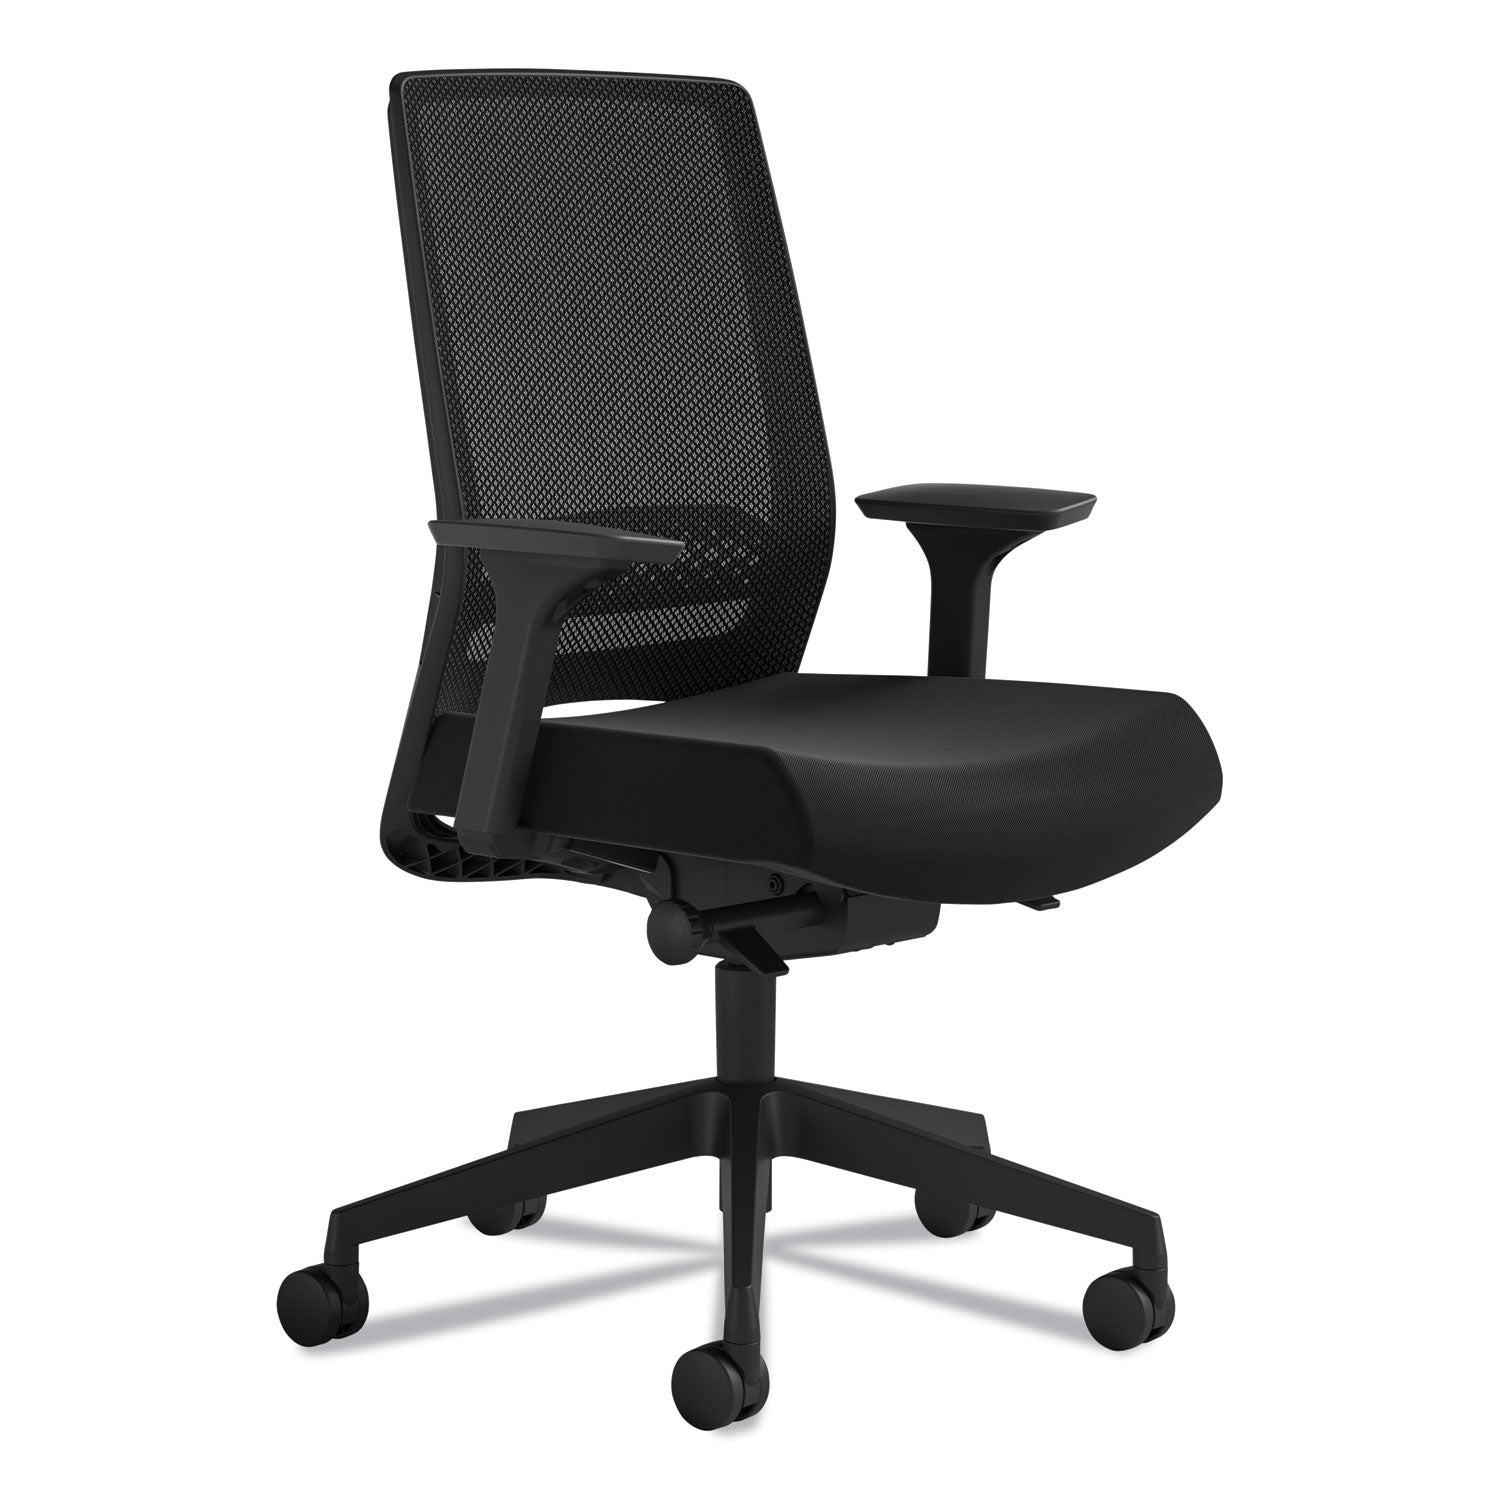 medina-deluxe-task-chair-supports-up-to-275-lb-18-to-22-seat-height-black_saf6830stbl - 1